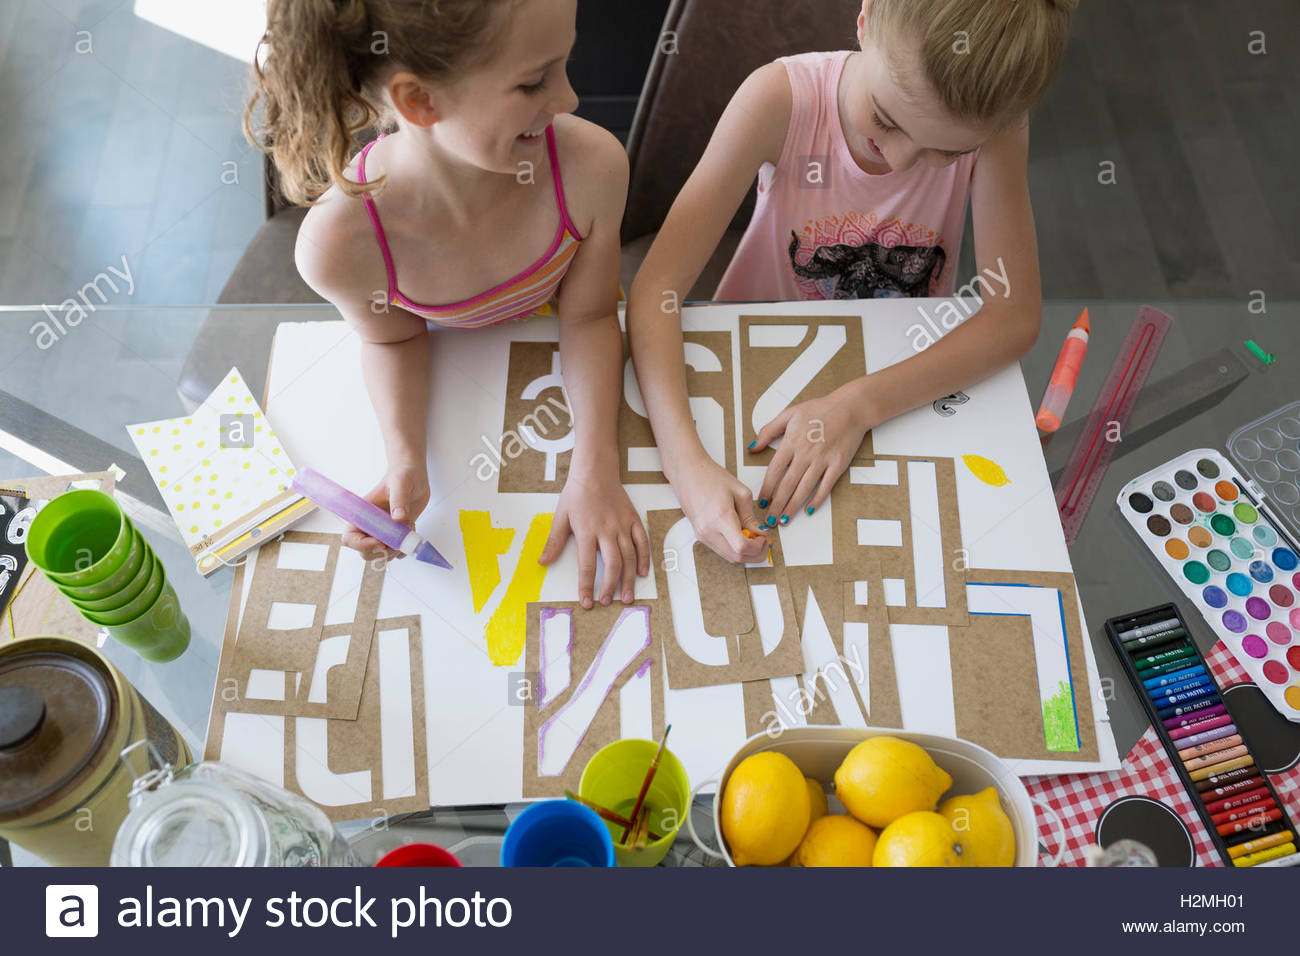 Girls making lemonade sign with stencils at dining table Stock Photo